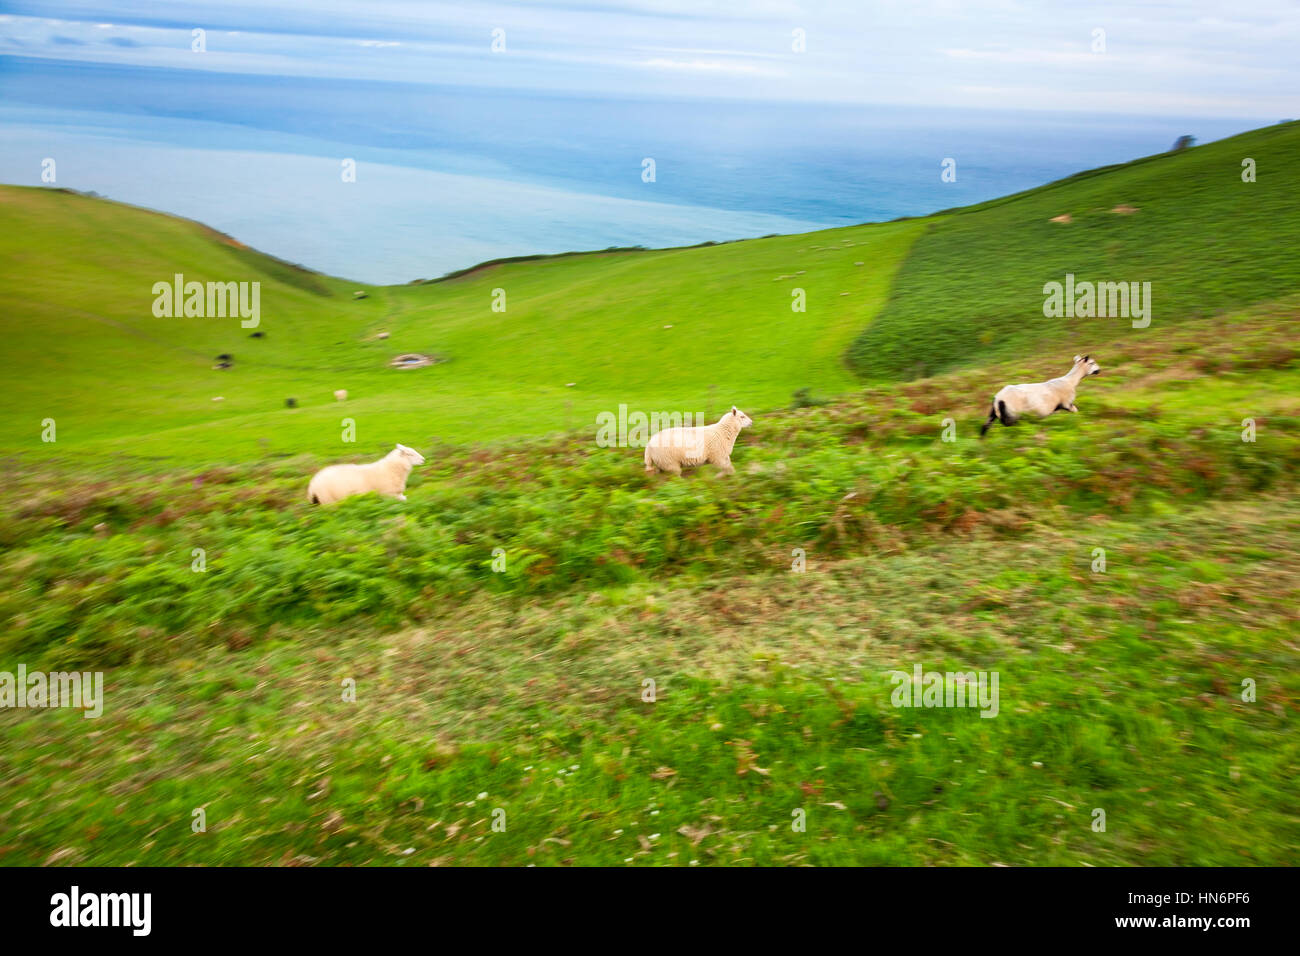 Sheep (Ovis aries) running through a lush green landscape along the South West Coast Path in Dorset, England. Stock Photo